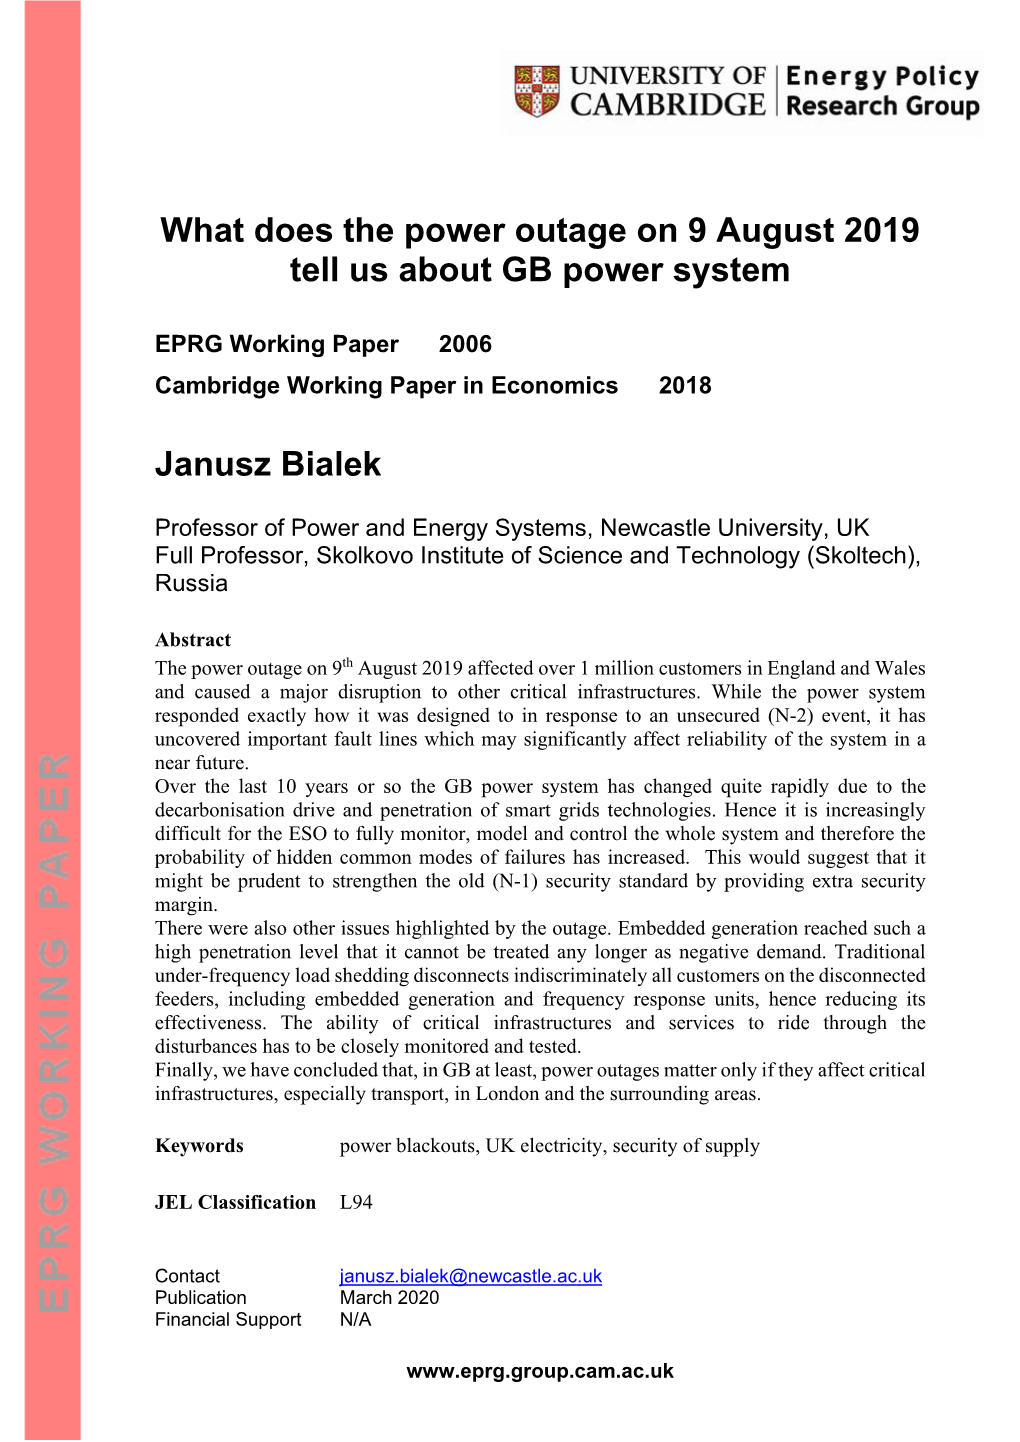 What Does the Power Outage on 9 August 2019 Tell Us About GB Power System Janusz Bialek